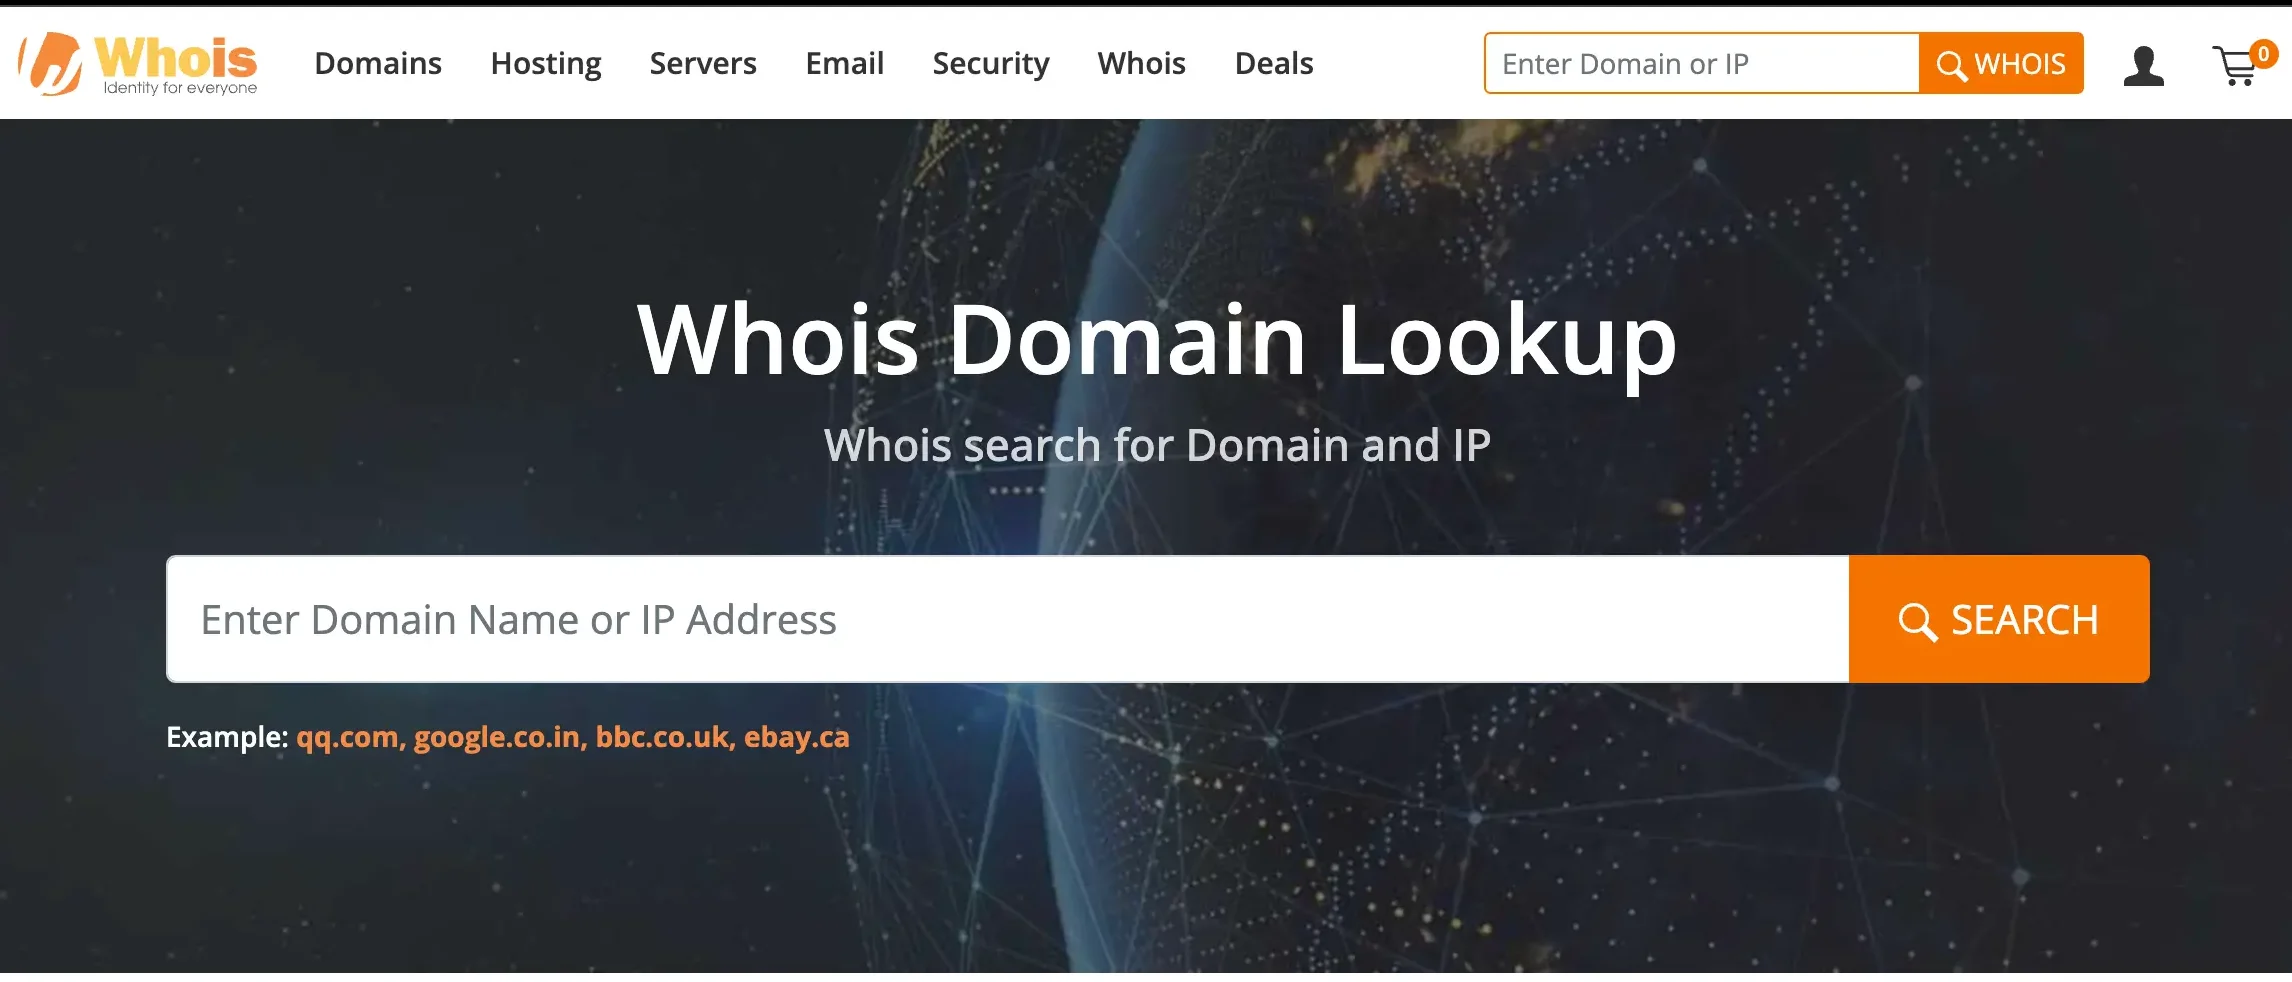 screenshot-of-whois-homepage-where-you-can-check-if-your-domain-is-valid